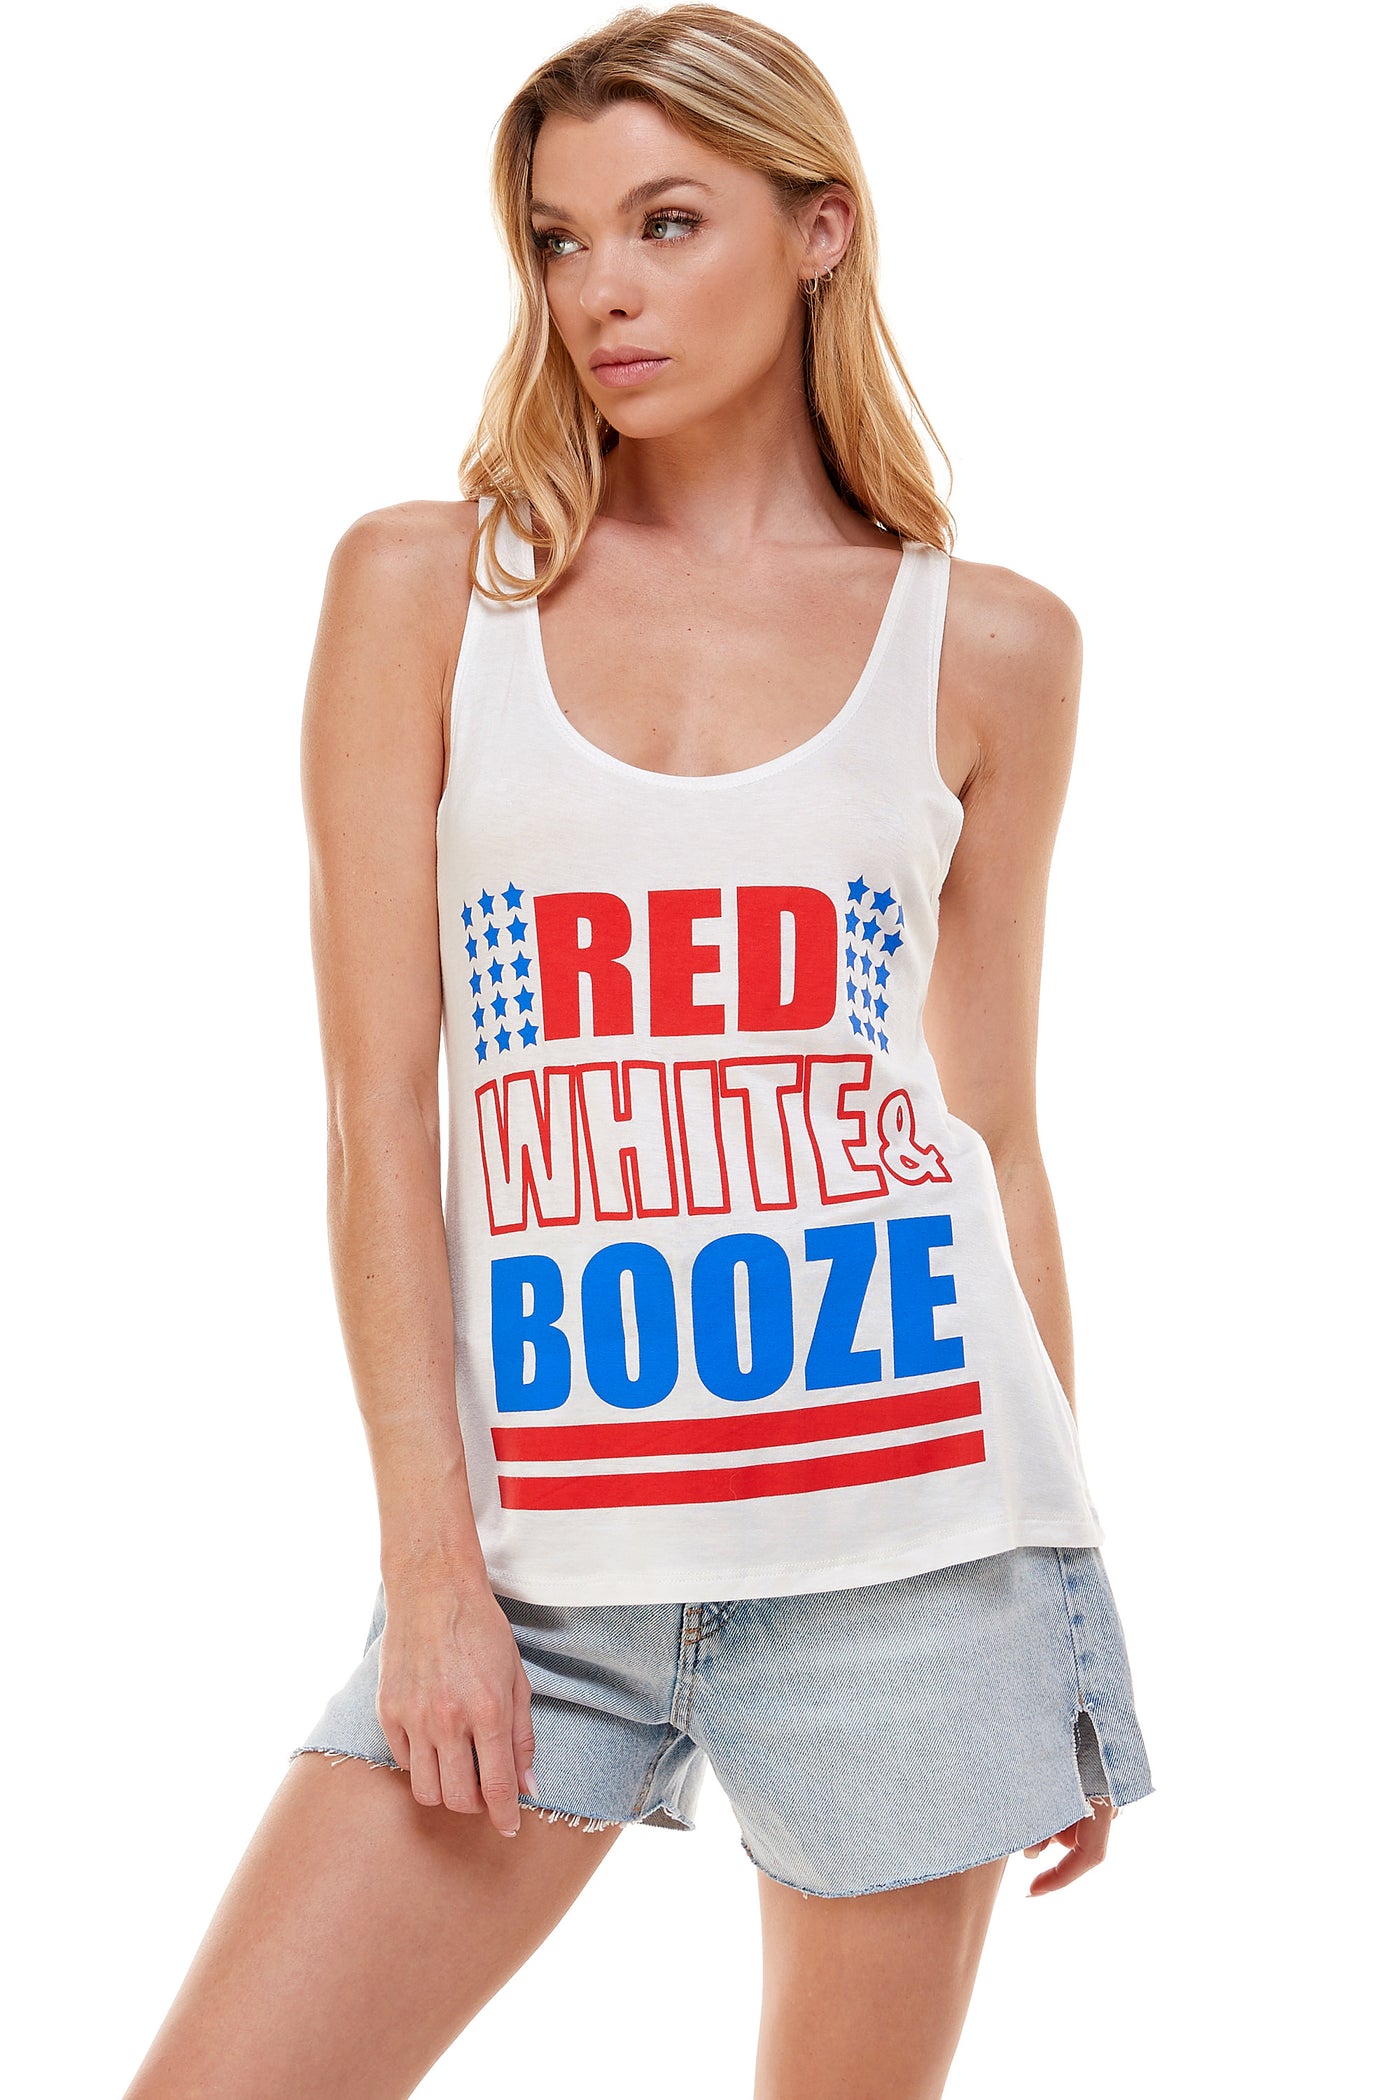 RED WHITE AND BOOZE TANK TOP - Trailsclothing.com